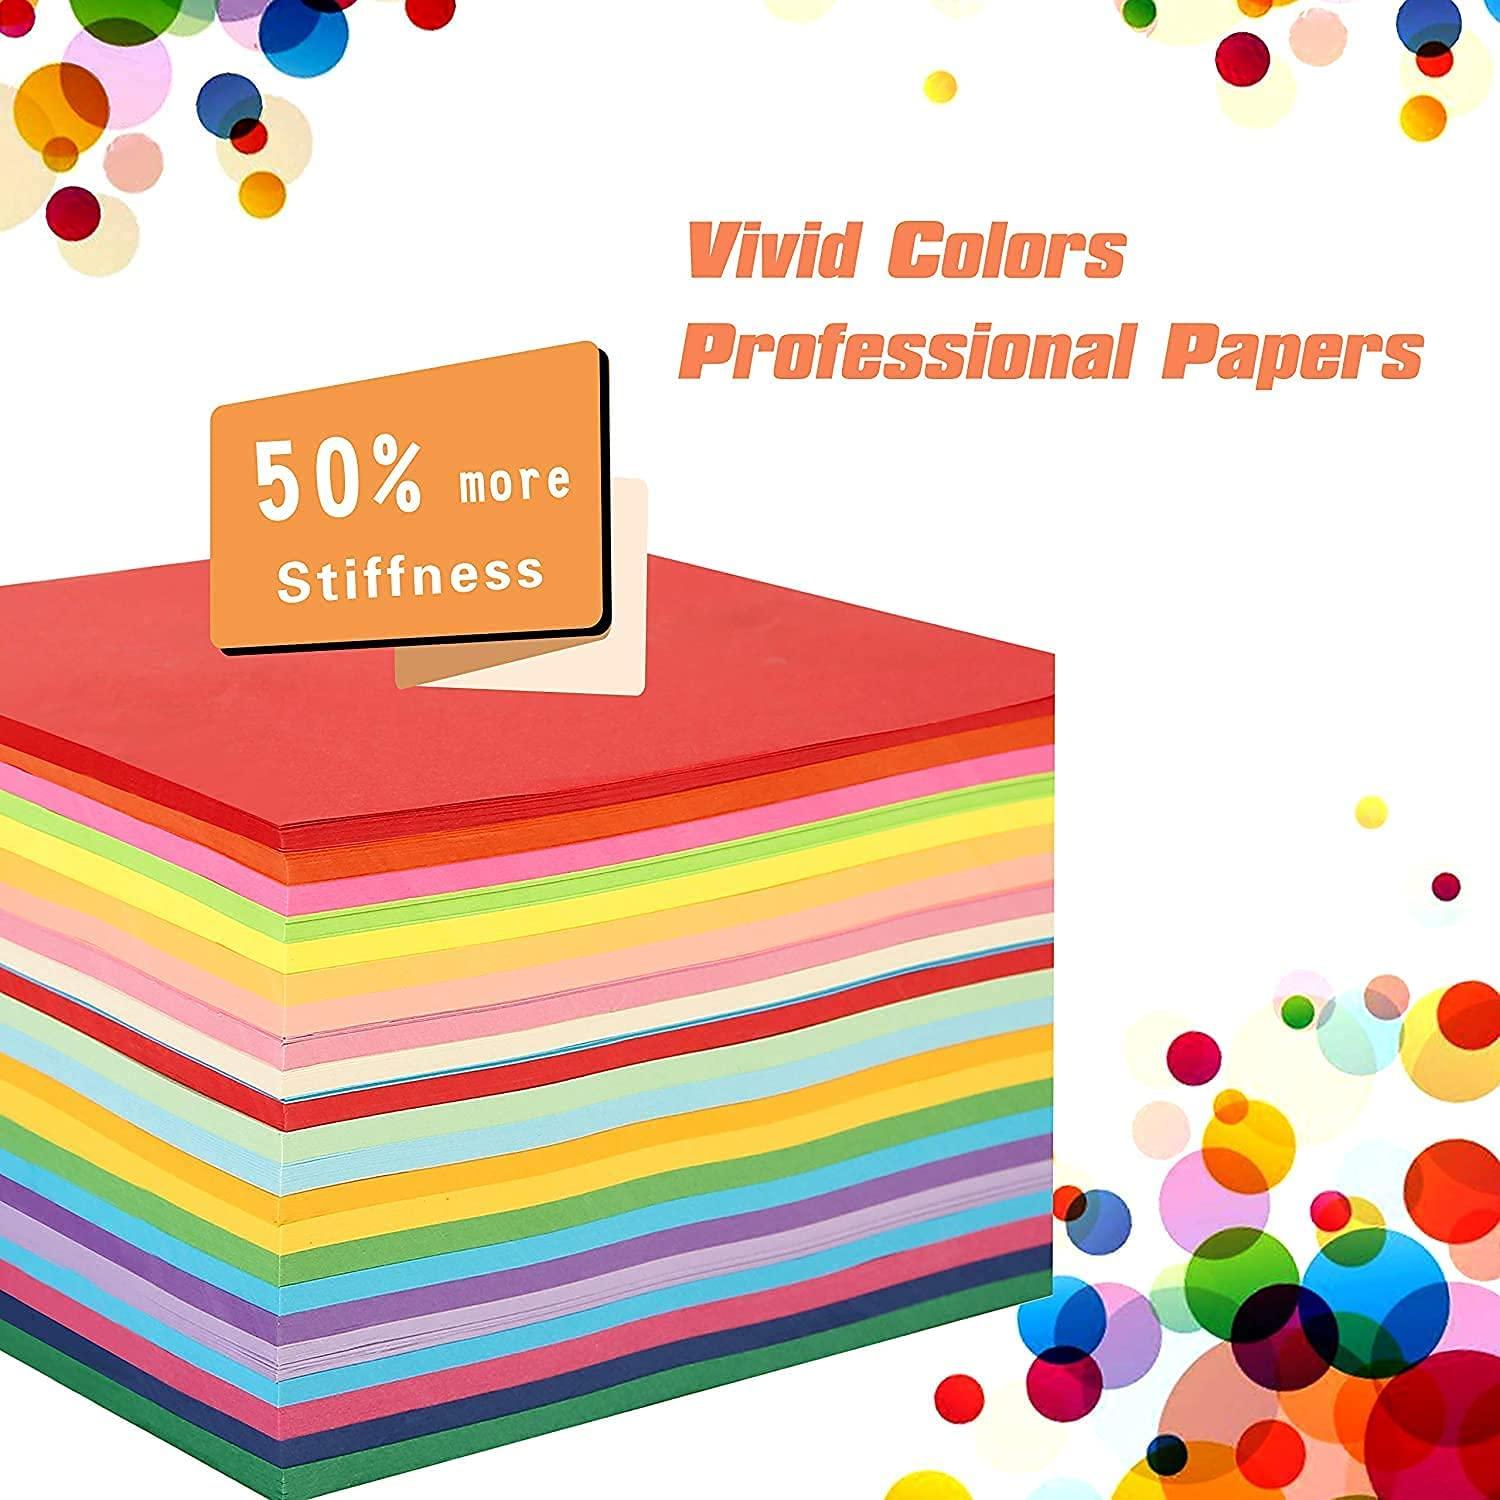 Bubu Origami Paper Double Sided Color - 200 Sheets - 20 Colors - 6 inch Square Easy Fold Paper for Beginner